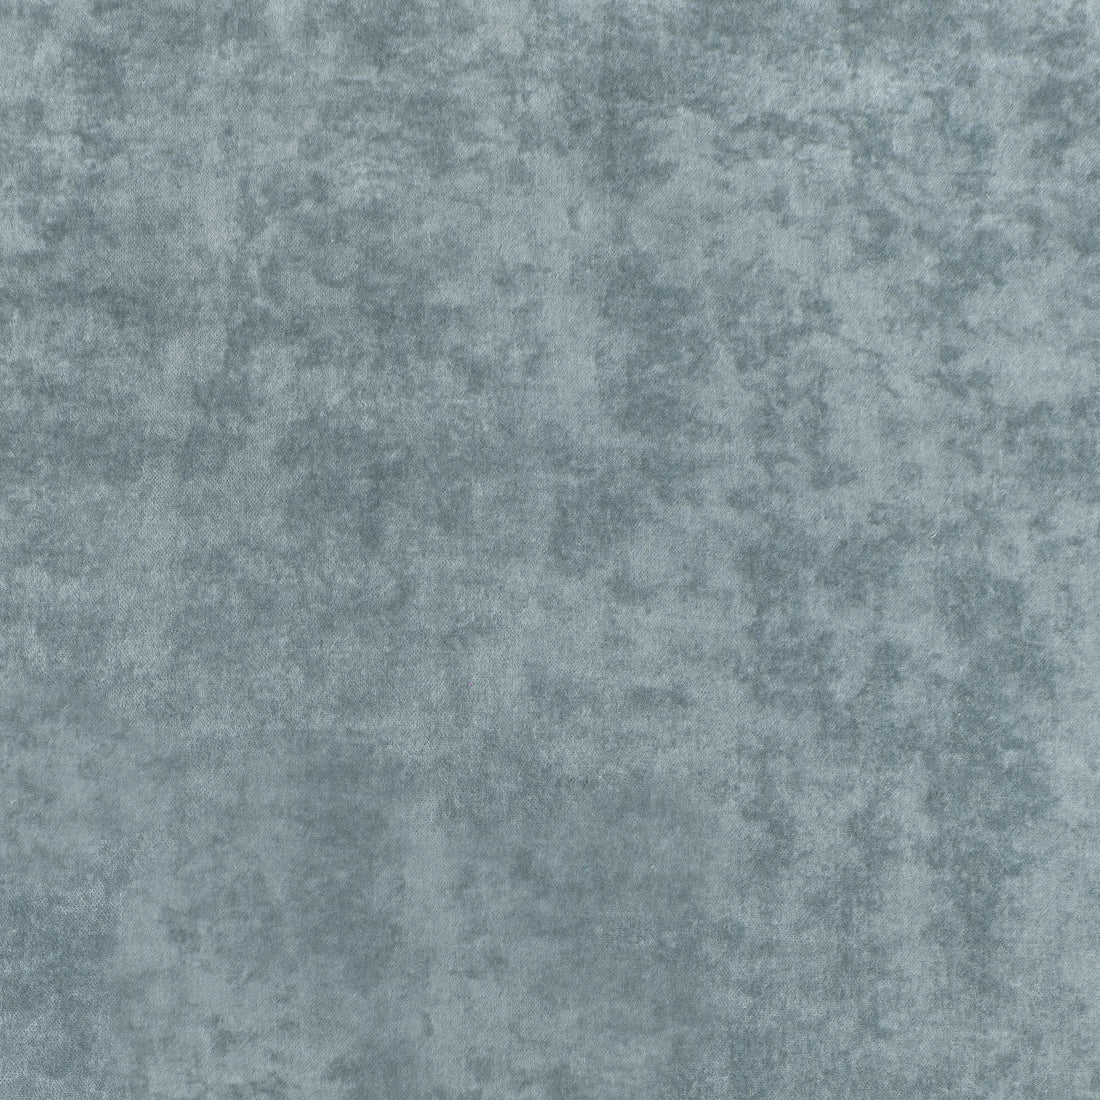 Celeste Velvet fabric in cloud color - pattern number W8970 - by Thibaut in the Lyra Velvets collection